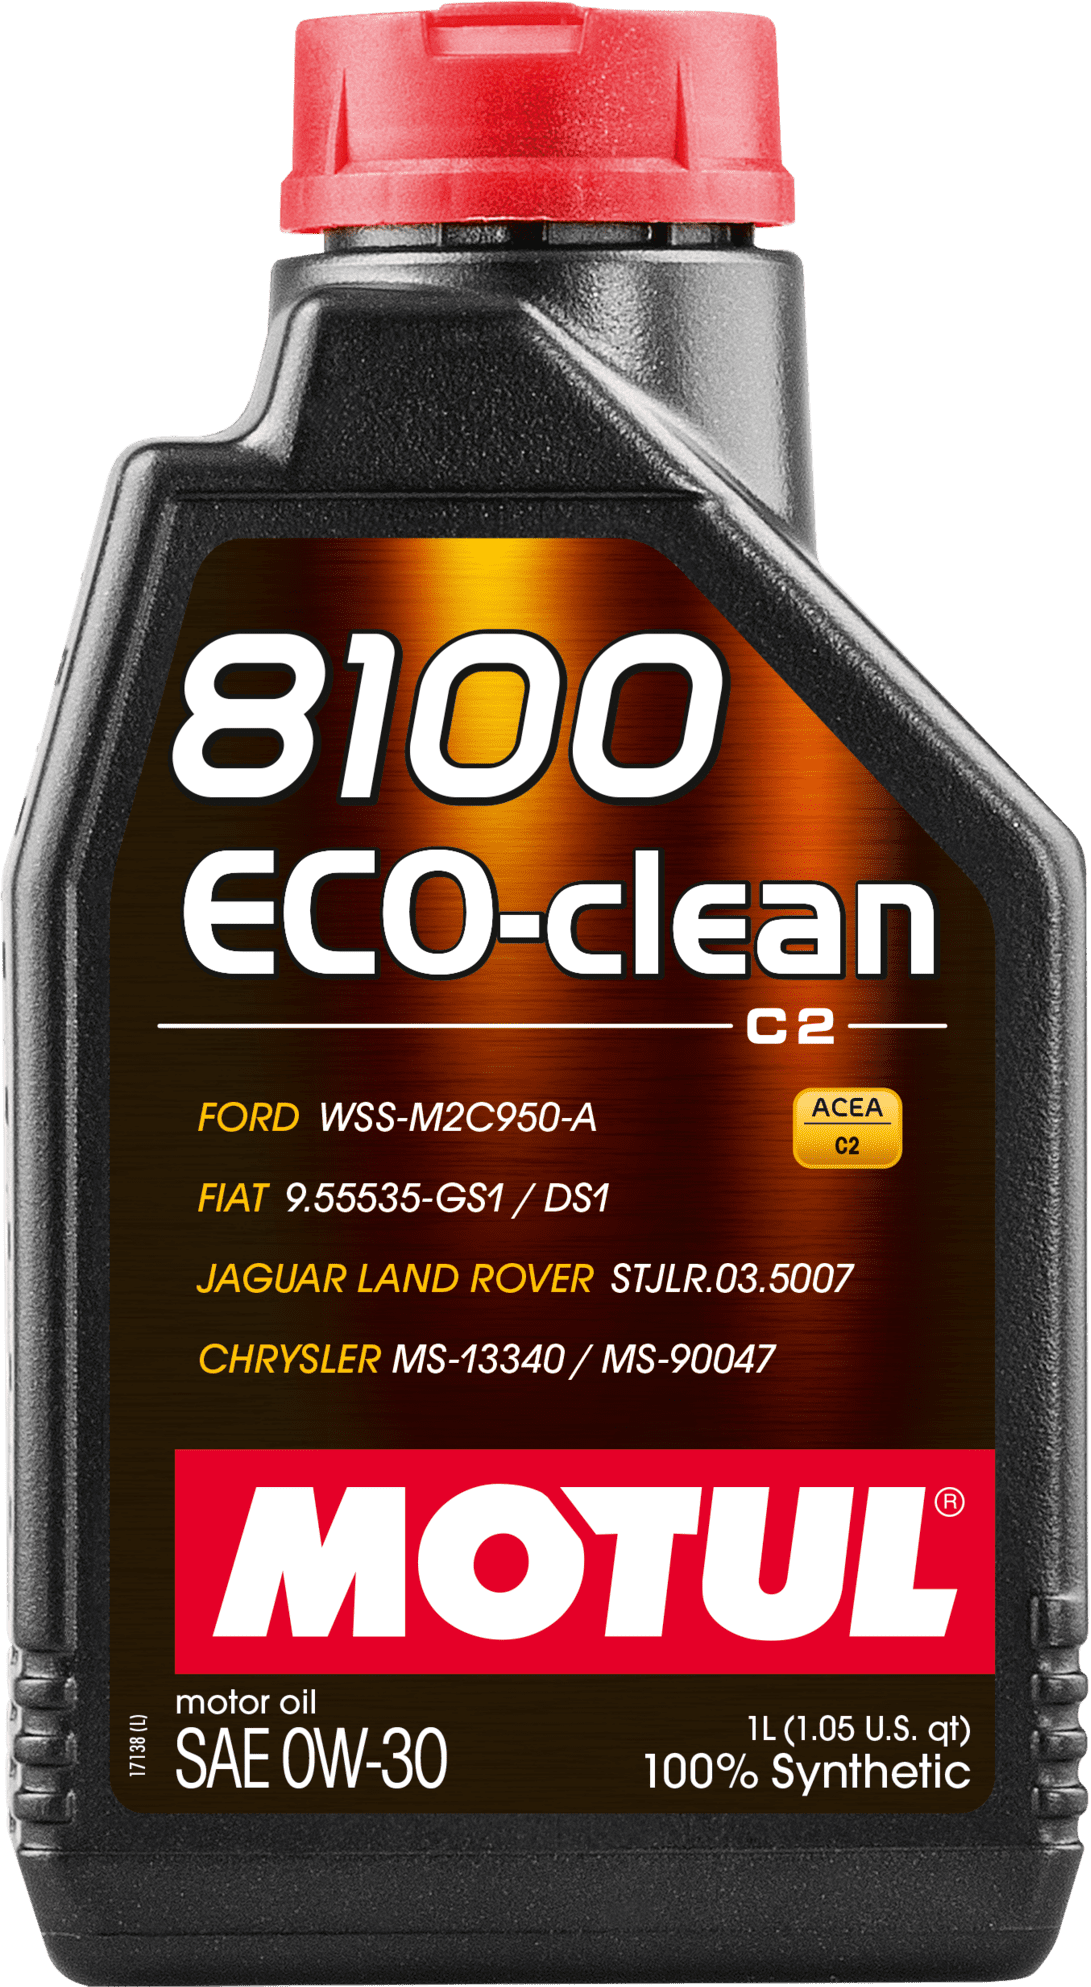 102888-1 100% Synthetic and fuel economy Engine lubricant.